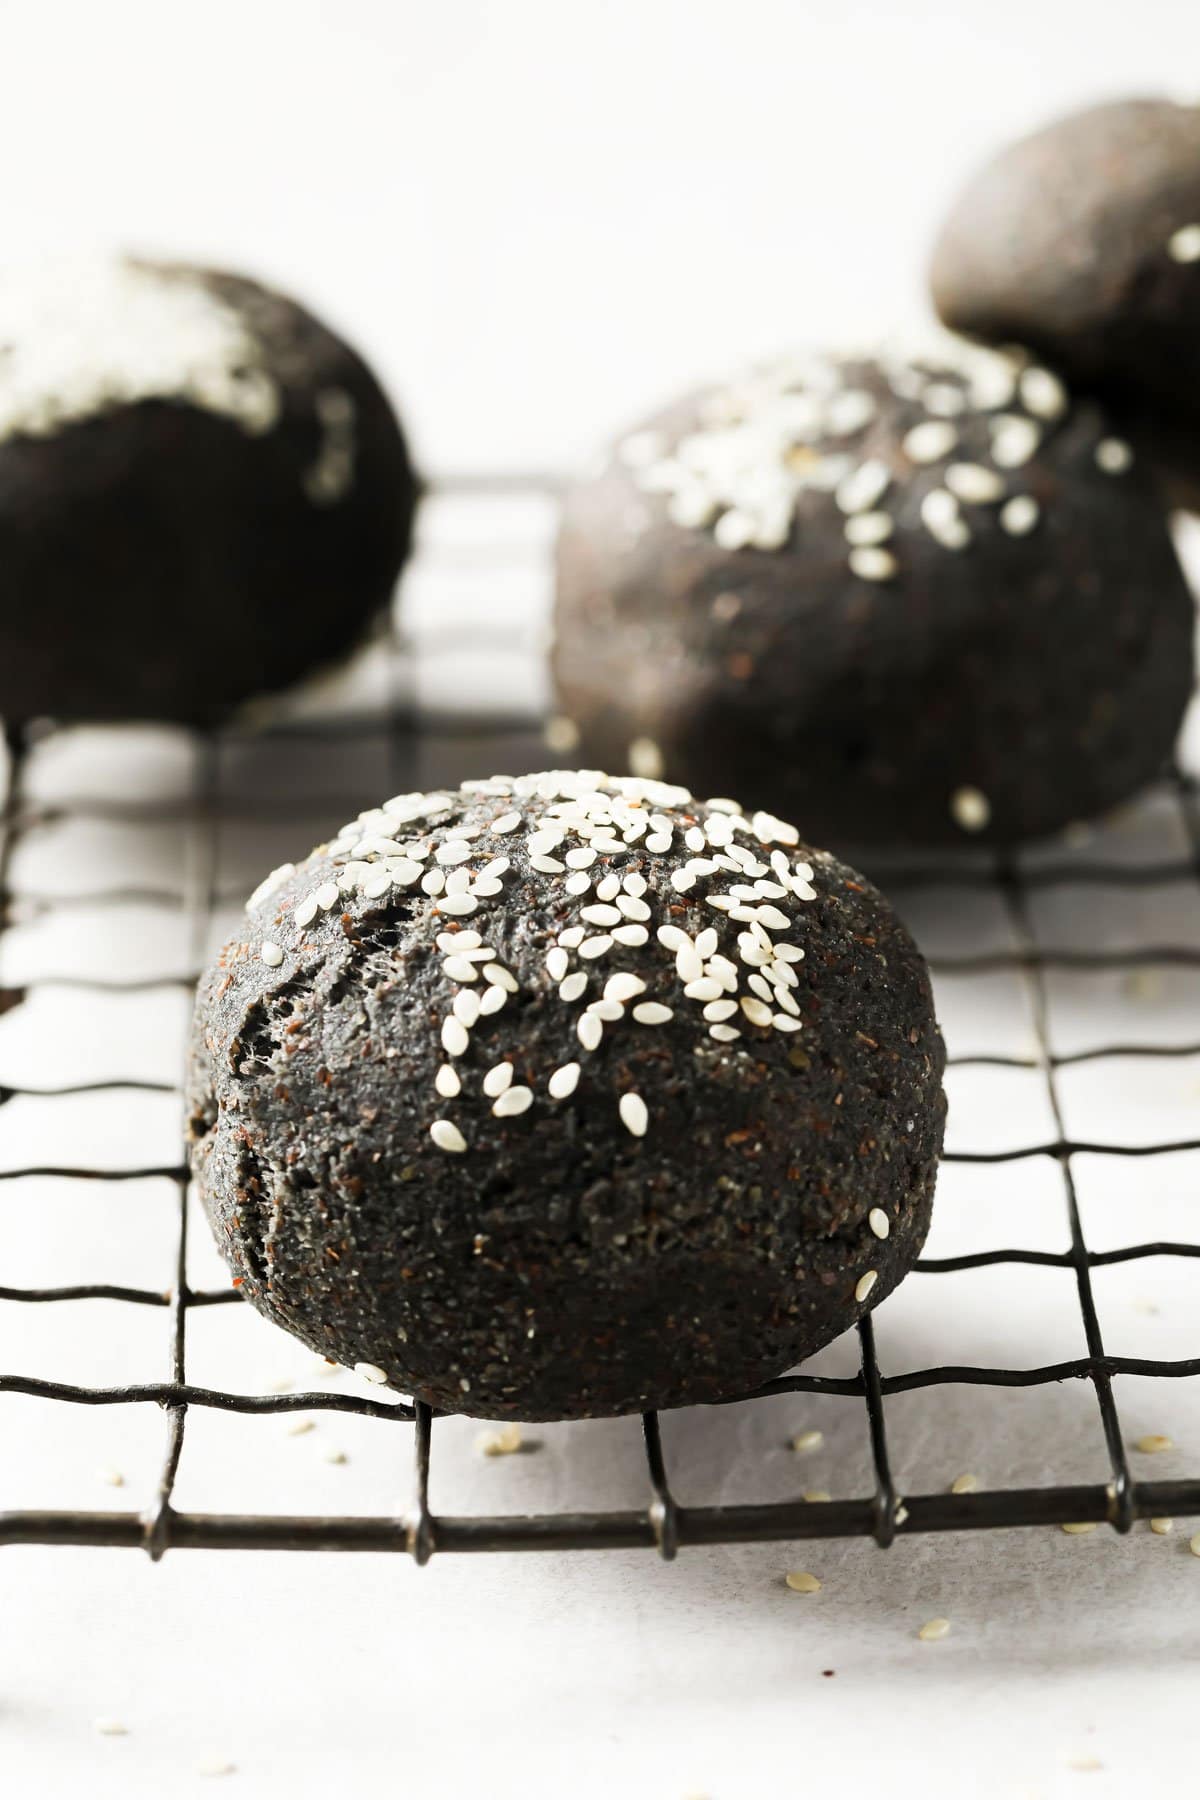 freshly baked buns topped with sesame seeds